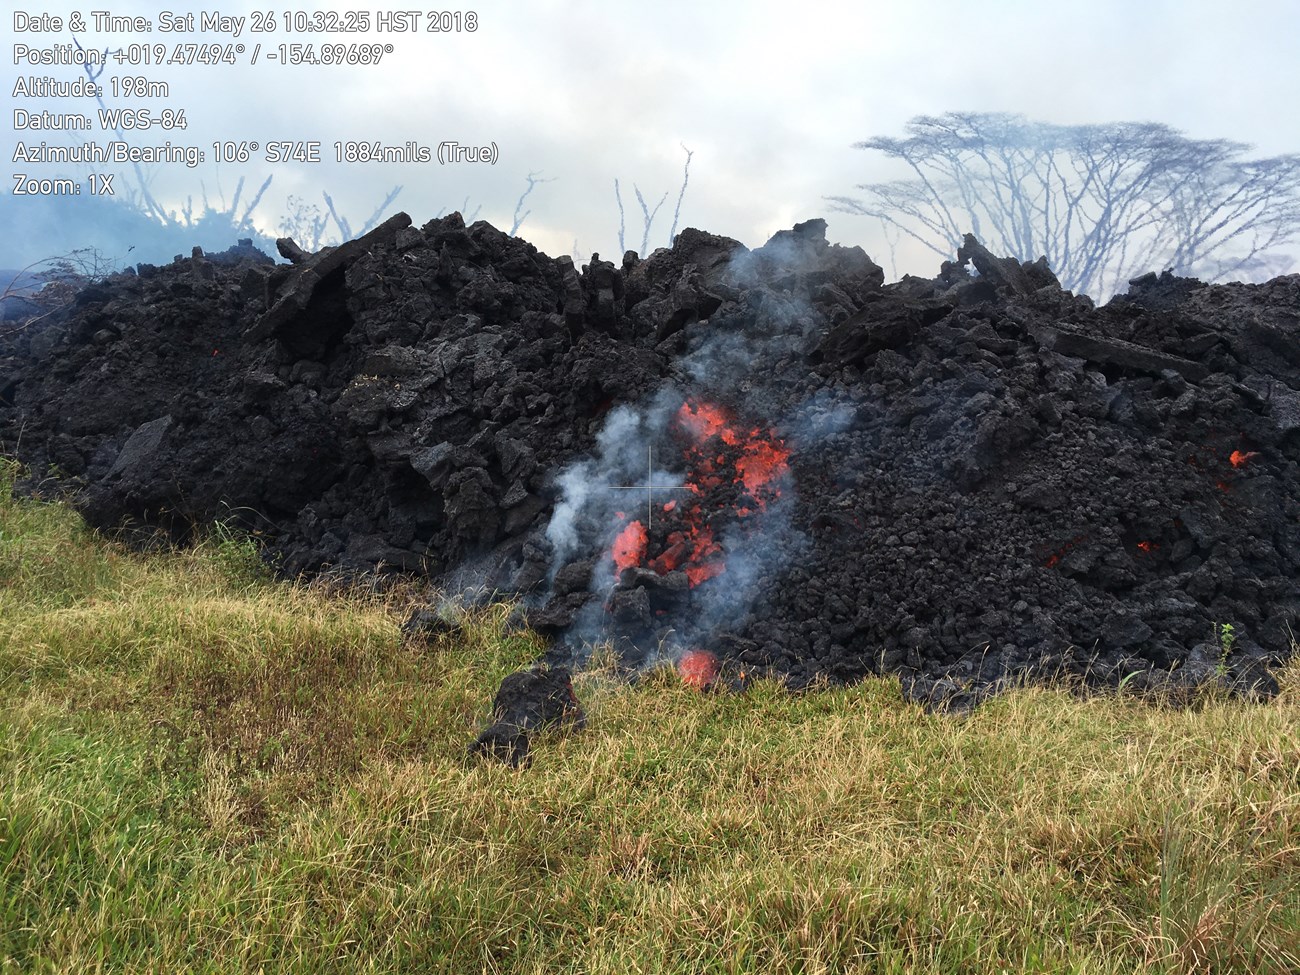 Photo of a blocky lava flow advancing into a grassy meadow.